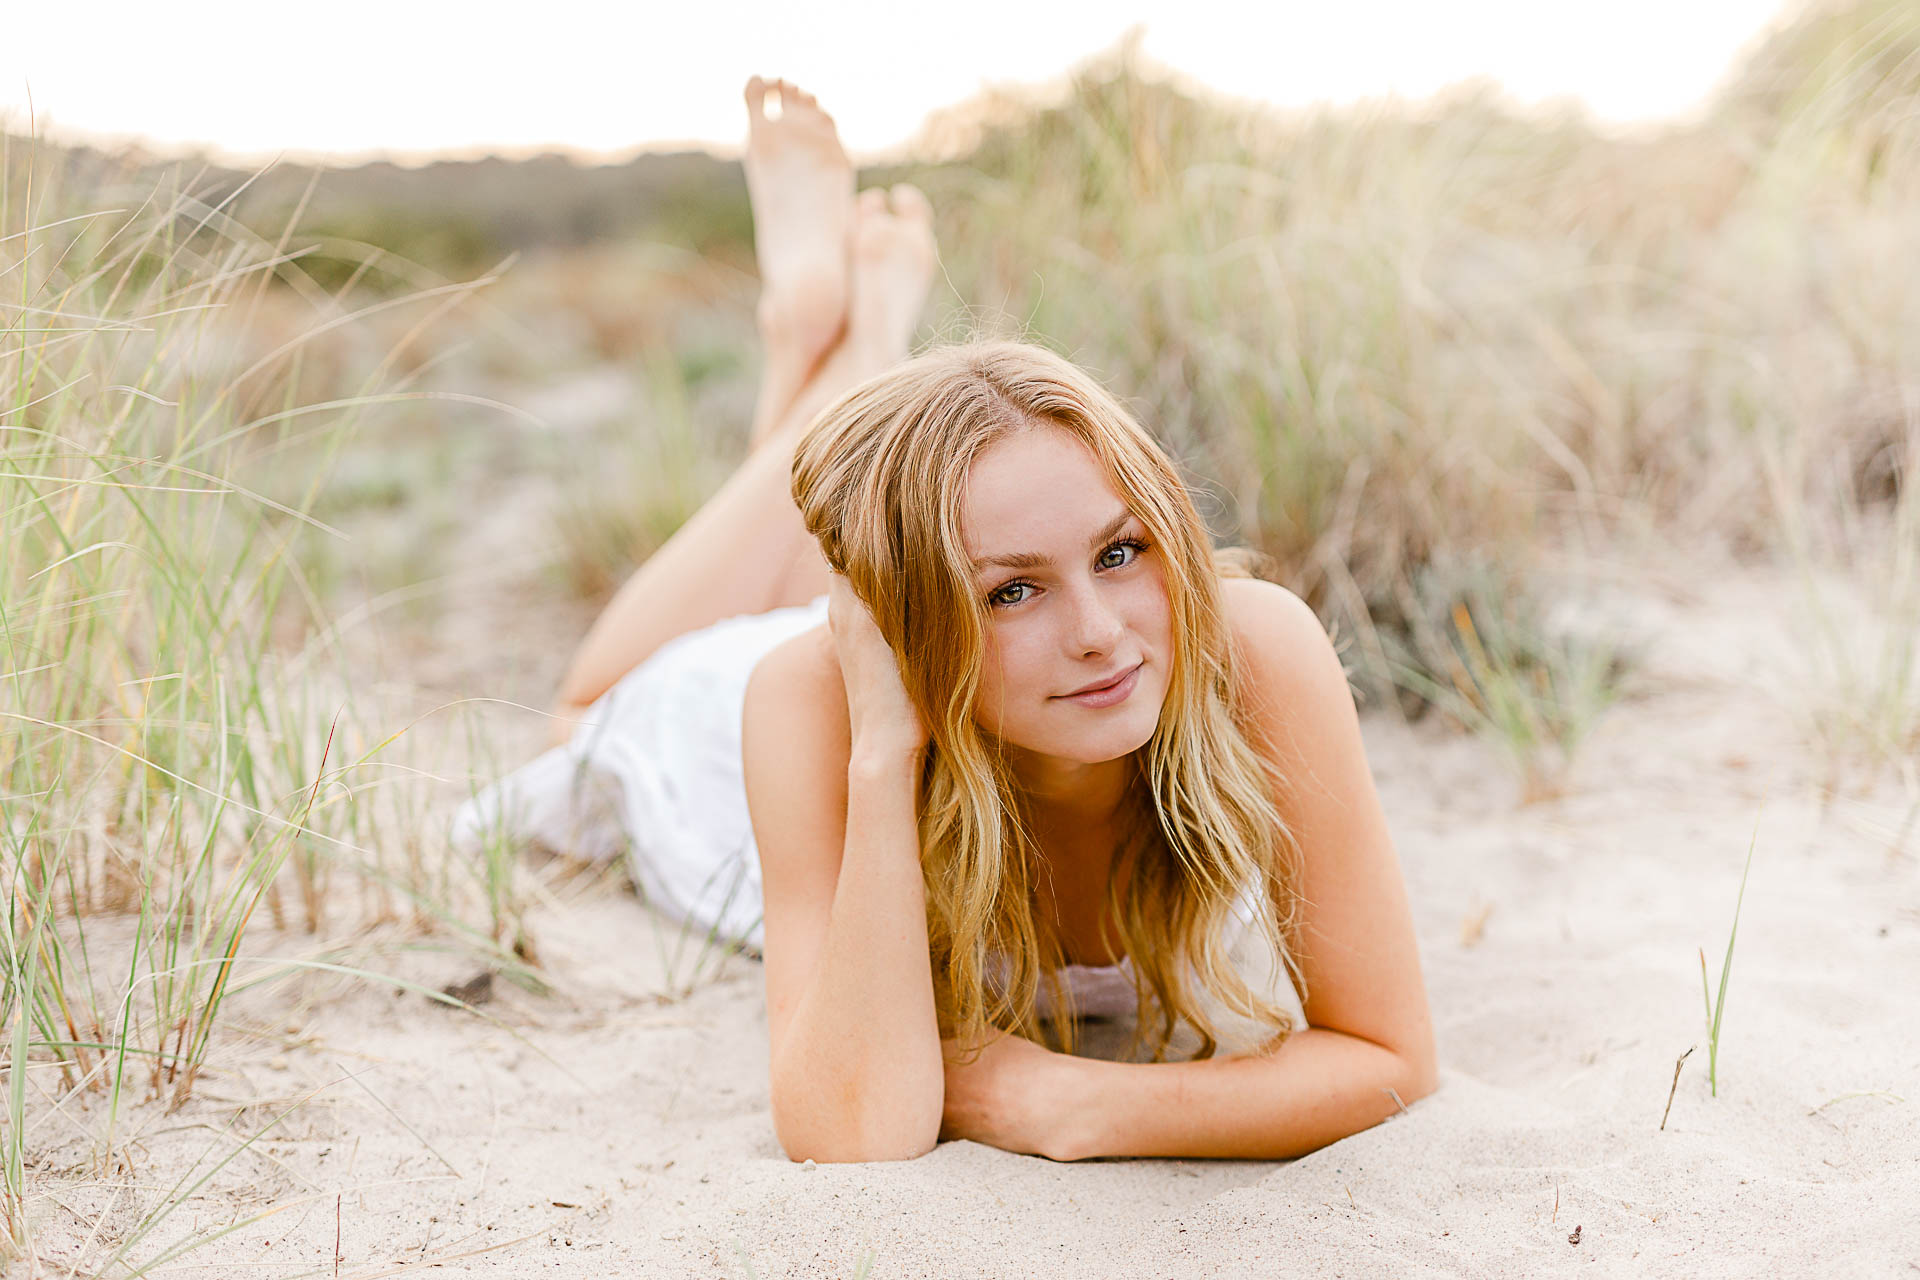 Photo by Plymouth Senior Portrait Photographer Christina Runnals | Girl laying in beach grass wearing a white dress